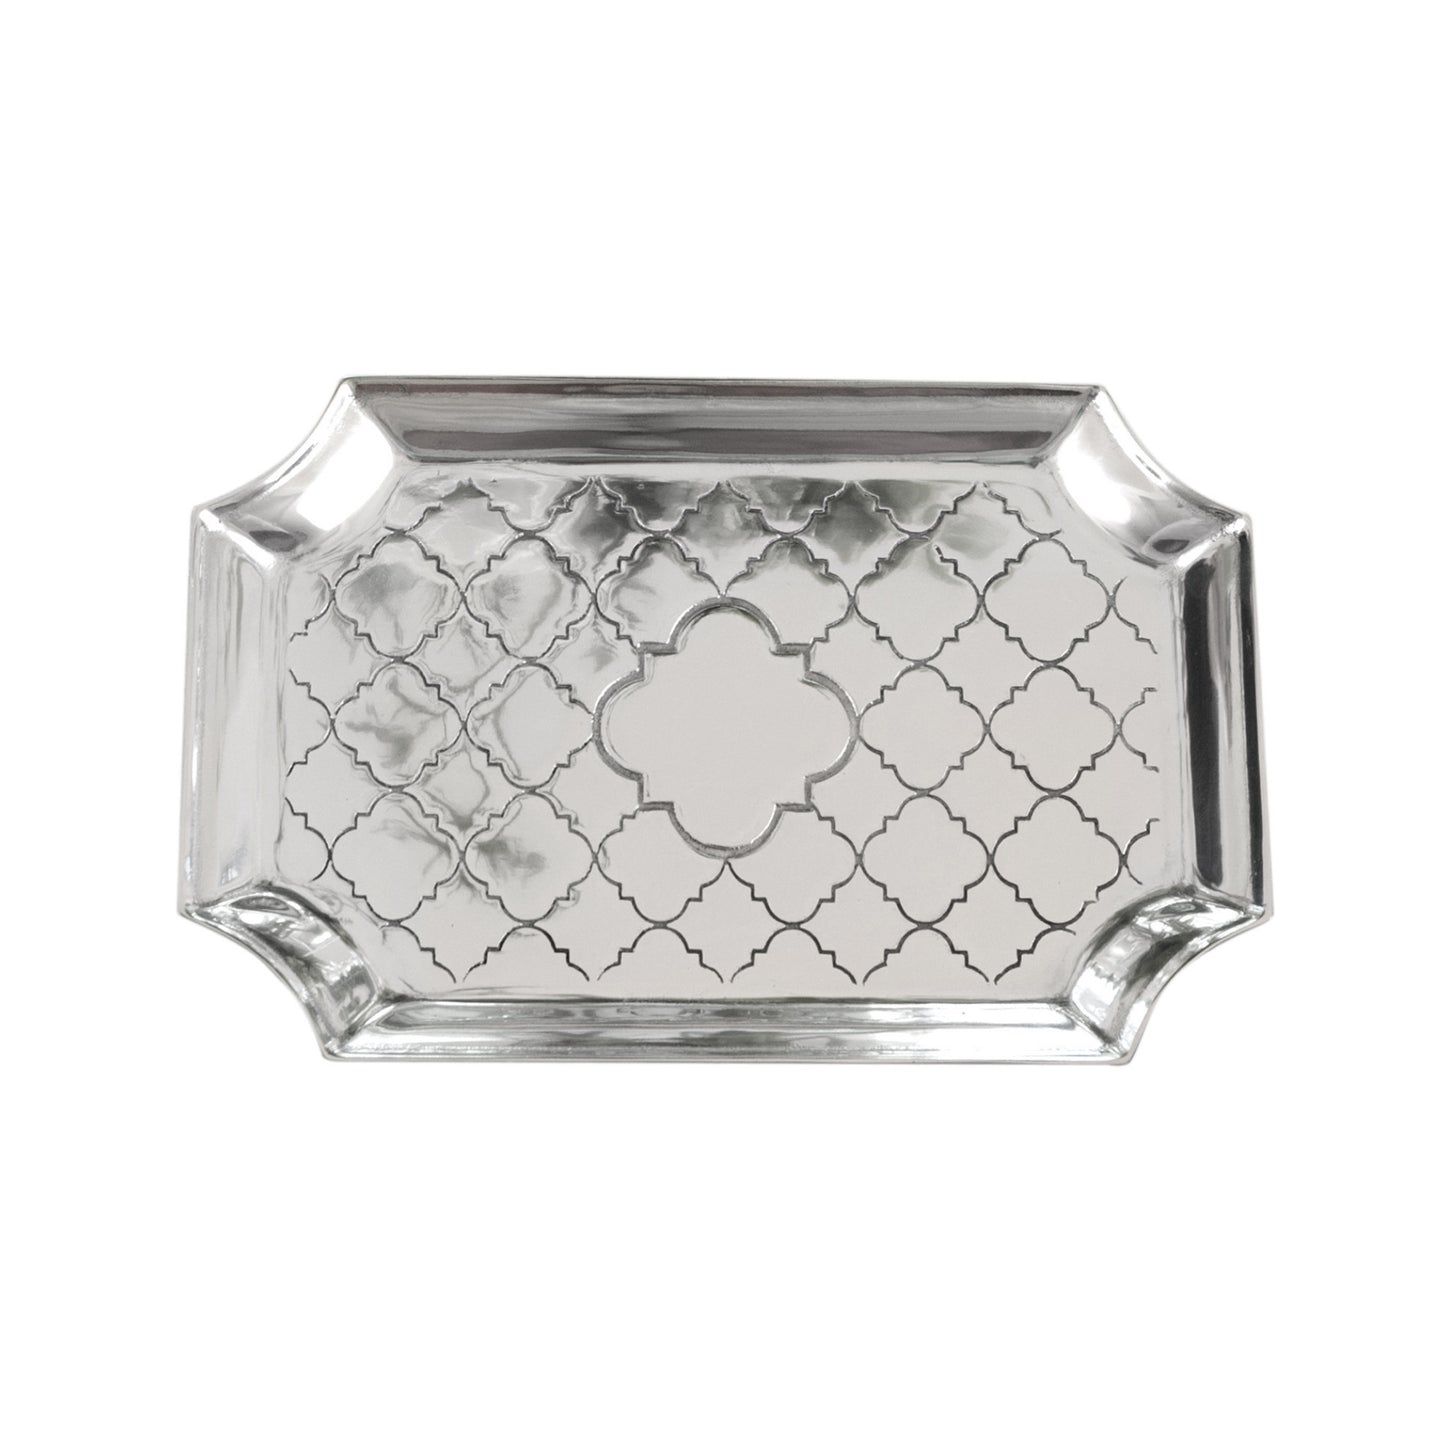 Templeton Silver Edged Vanity Tray that can be engraved